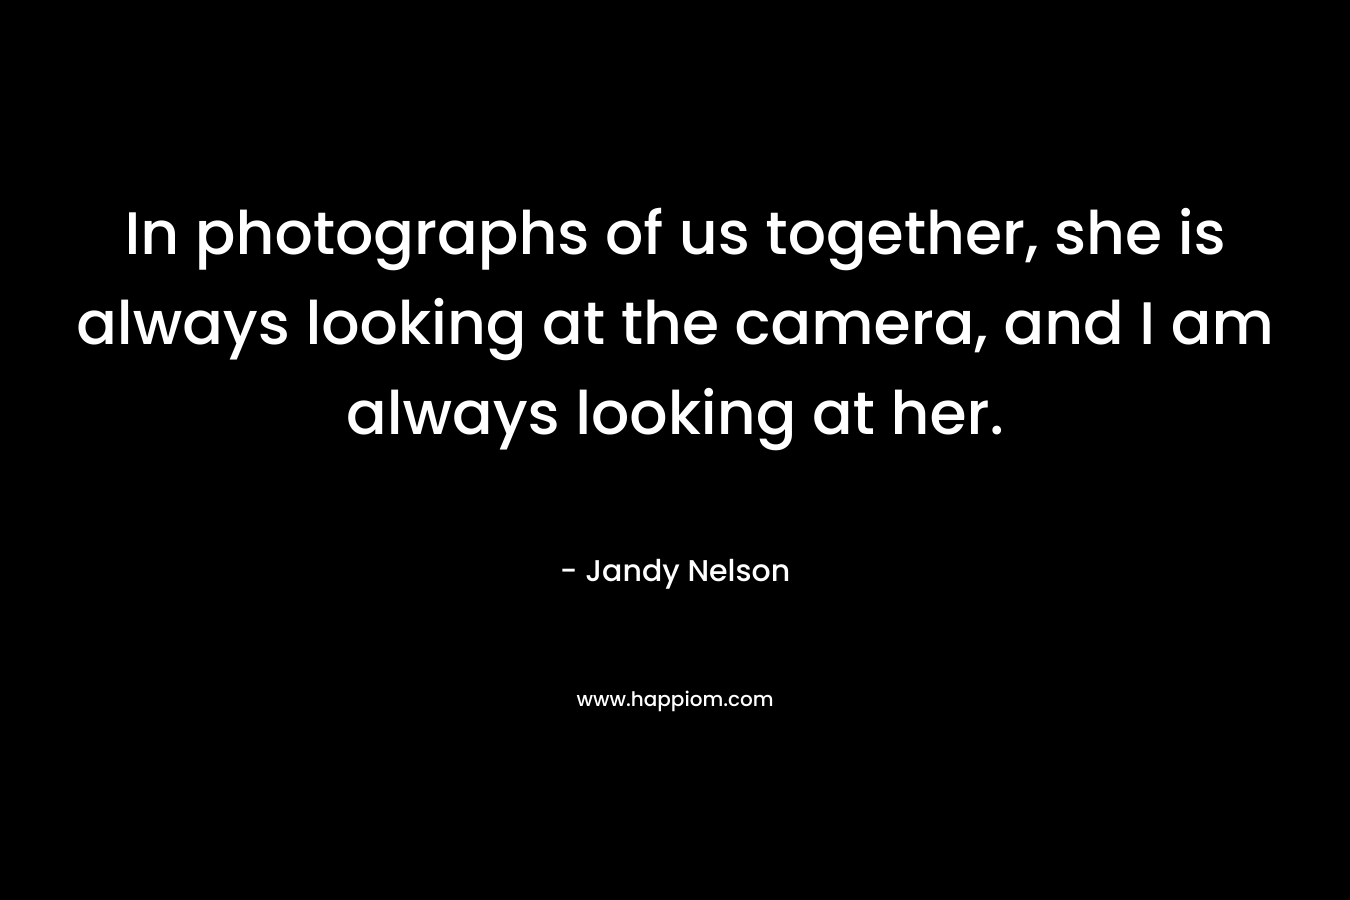 In photographs of us together, she is always looking at the camera, and I am always looking at her. – Jandy Nelson